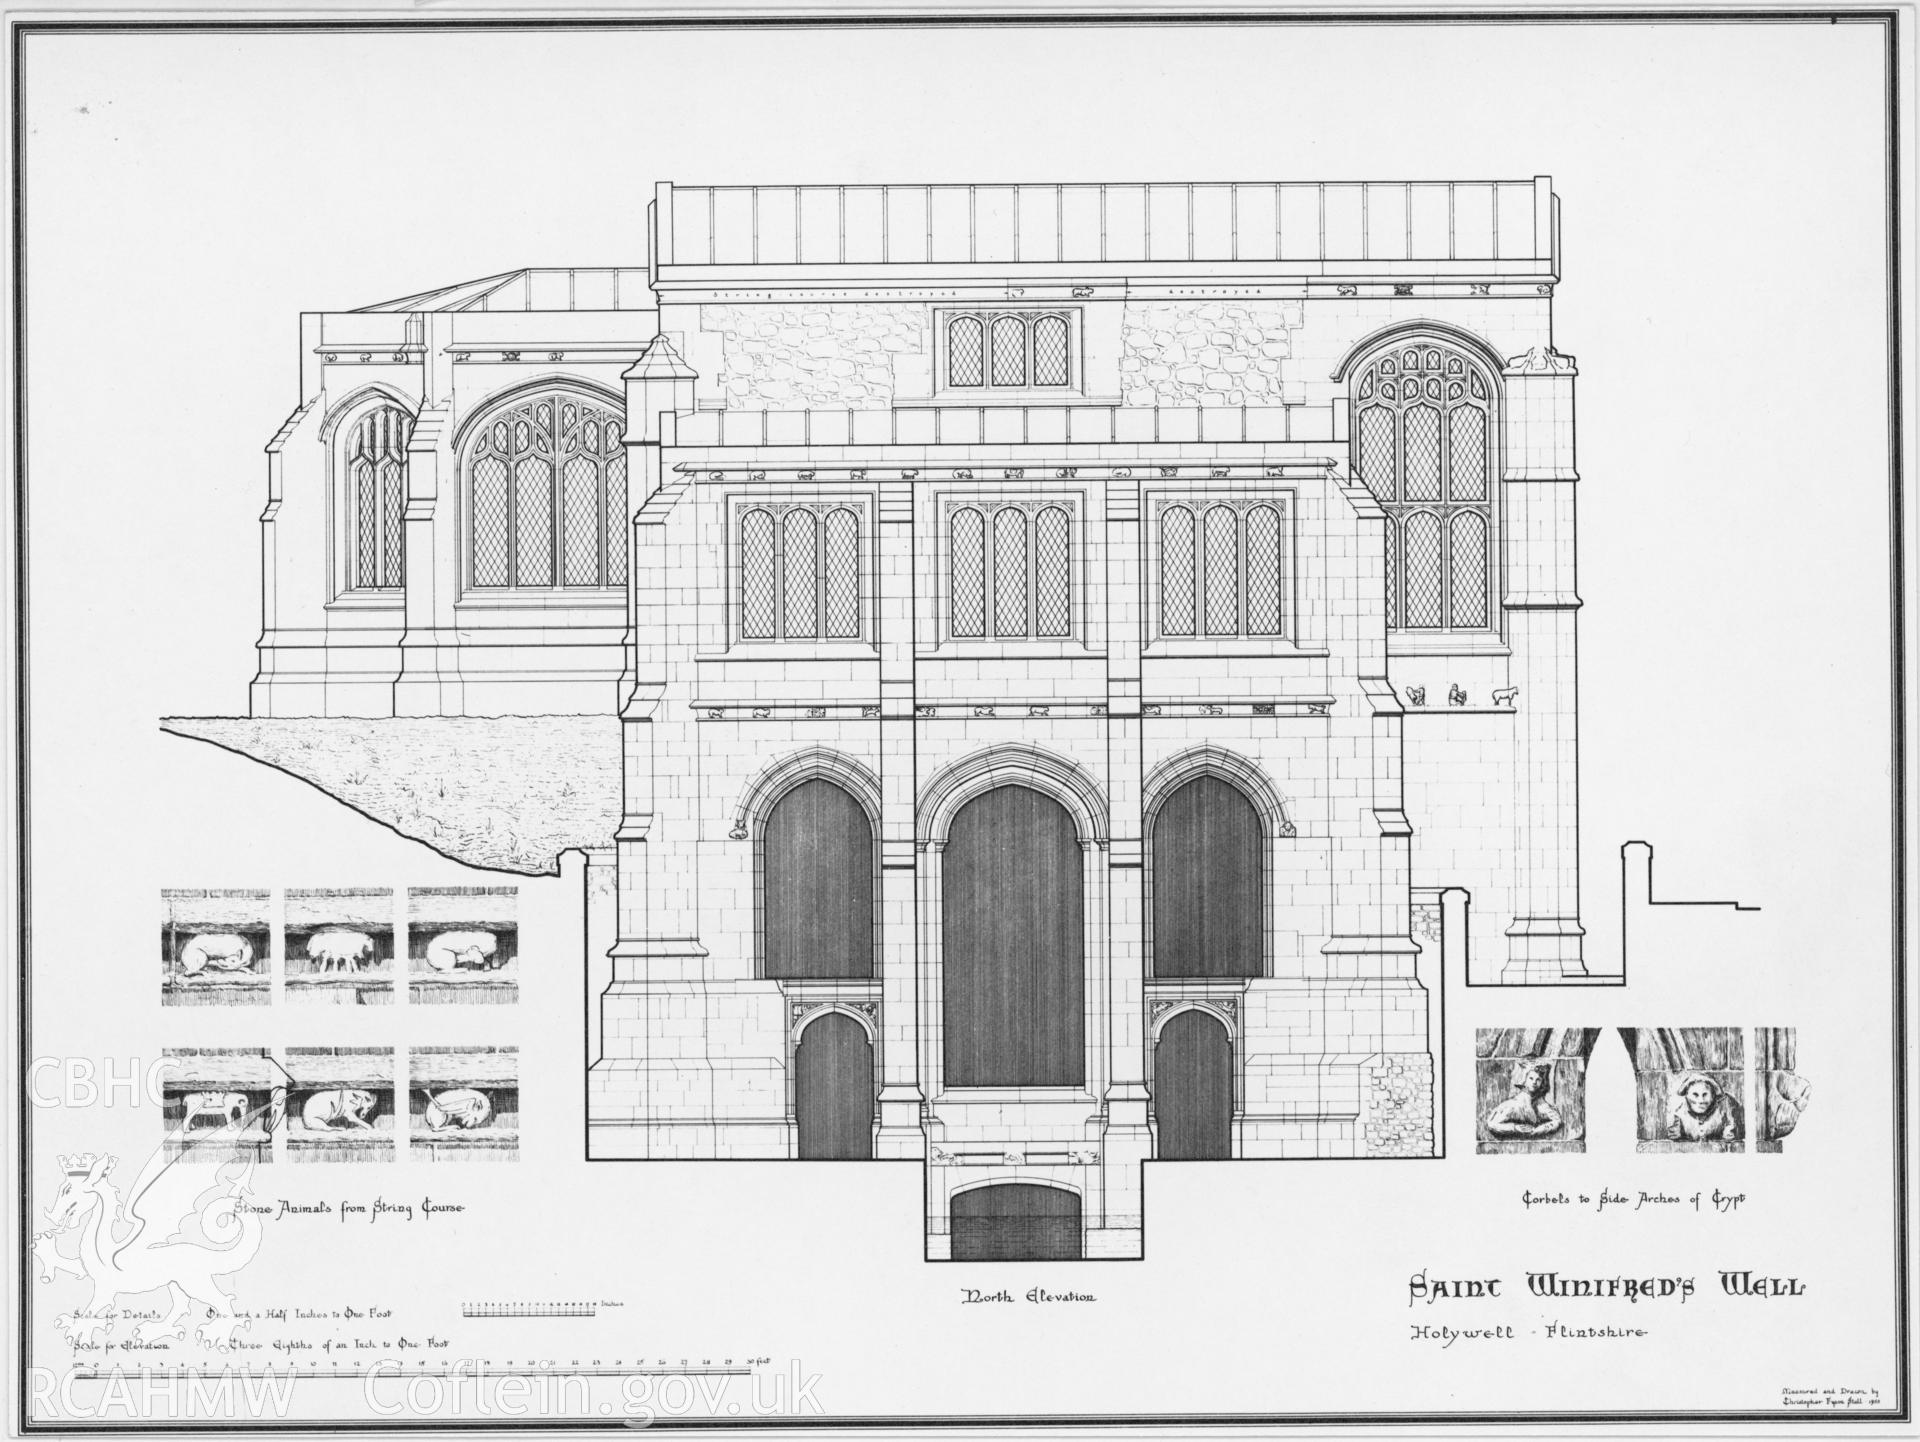 Digital copy of an elevation drawing of the north side of St Winifrede's Well.